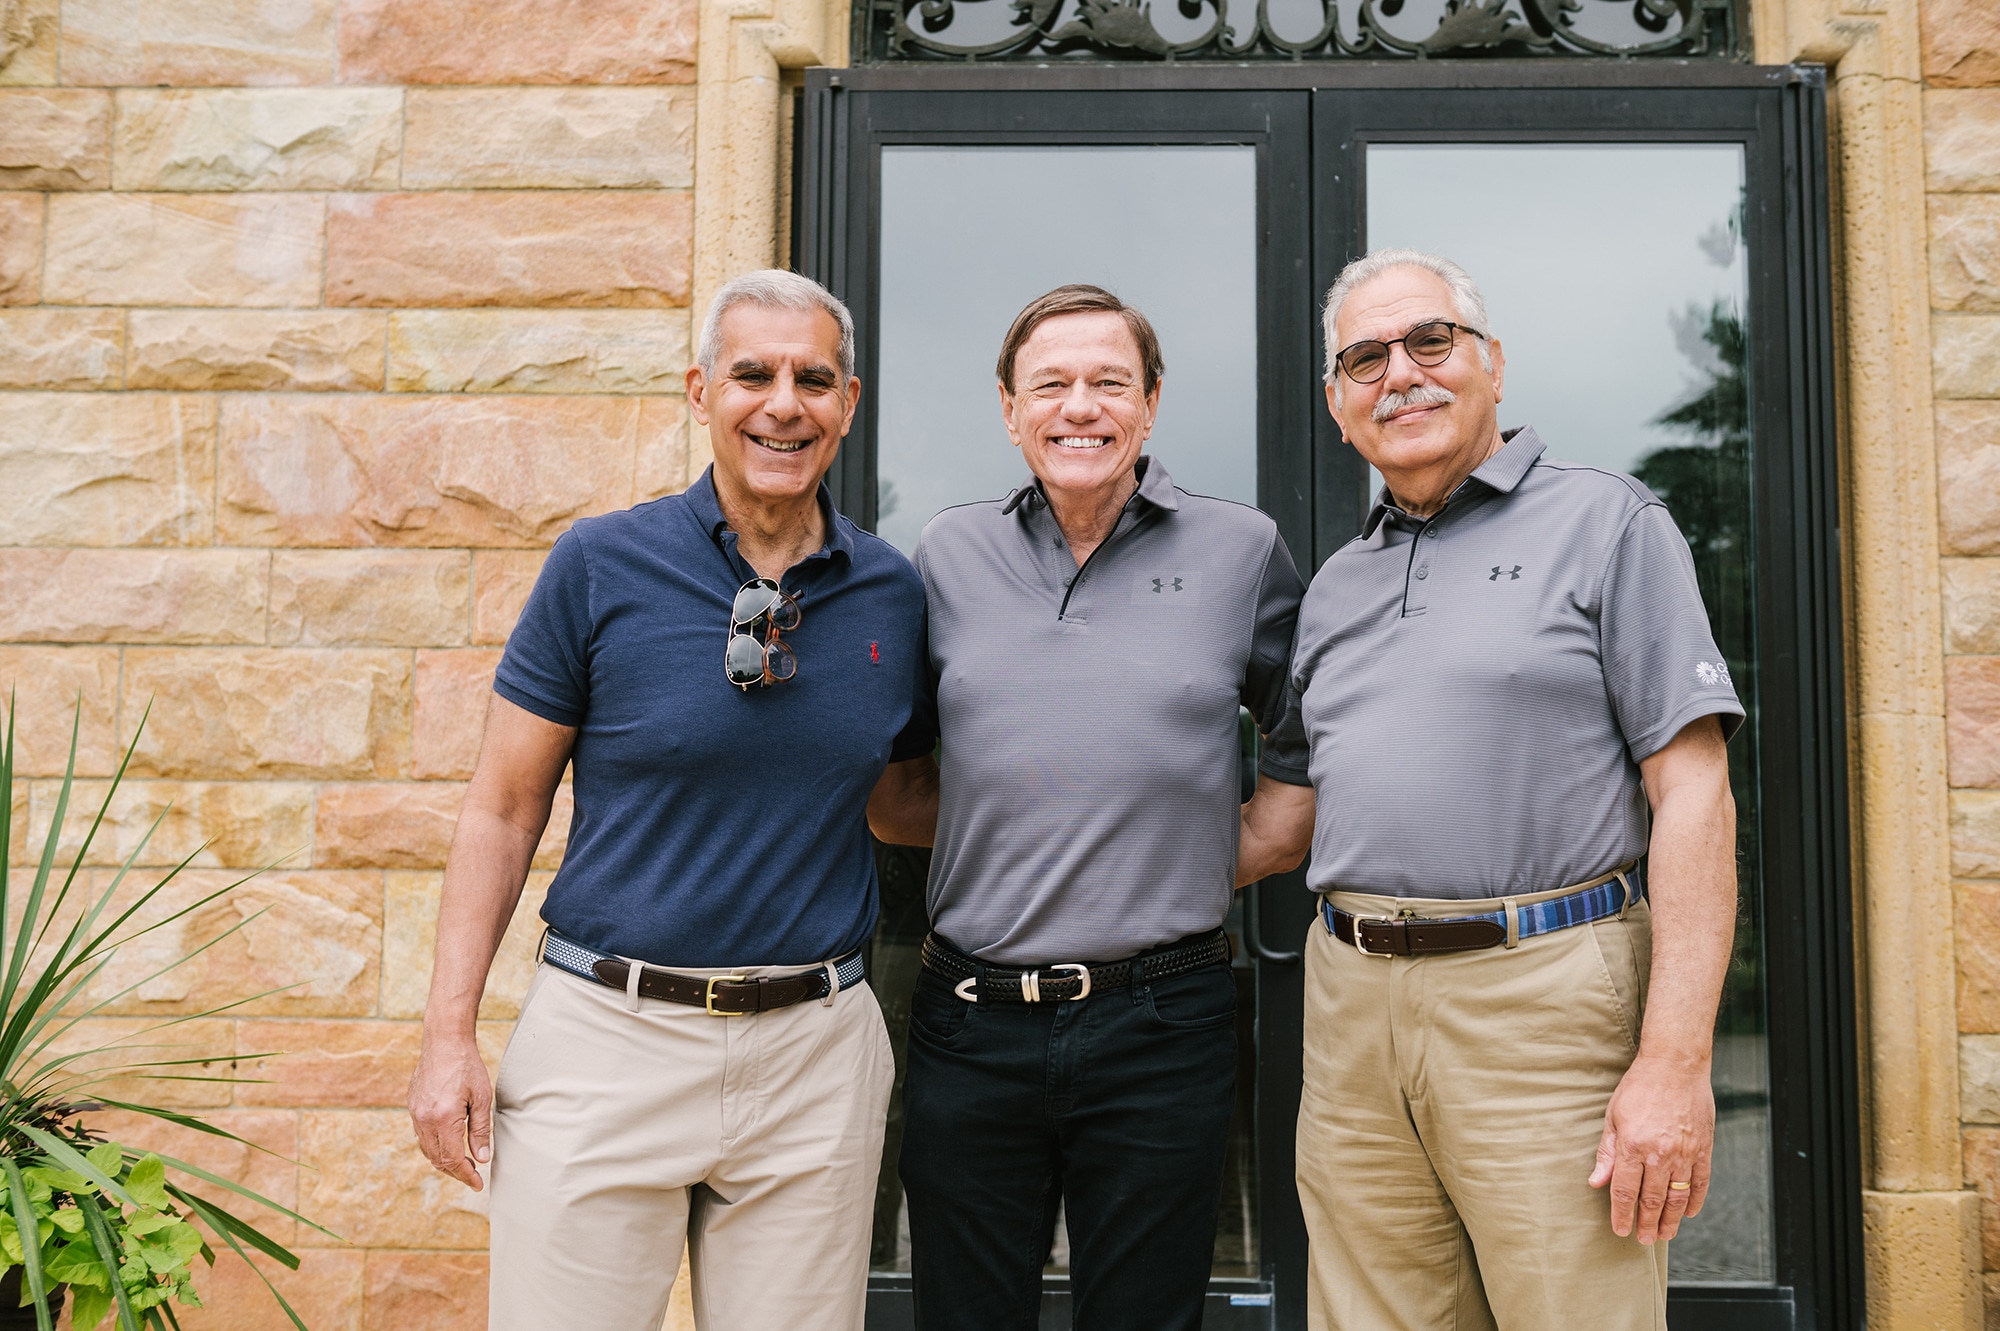 Community Options' President & CEO, Robert Stack, with Senator Joe Kyrillos and Community Options Enterprises' Chairman, Philip Lian, at the annual iMatter Spring Golf Classic in support of people with disabilities.